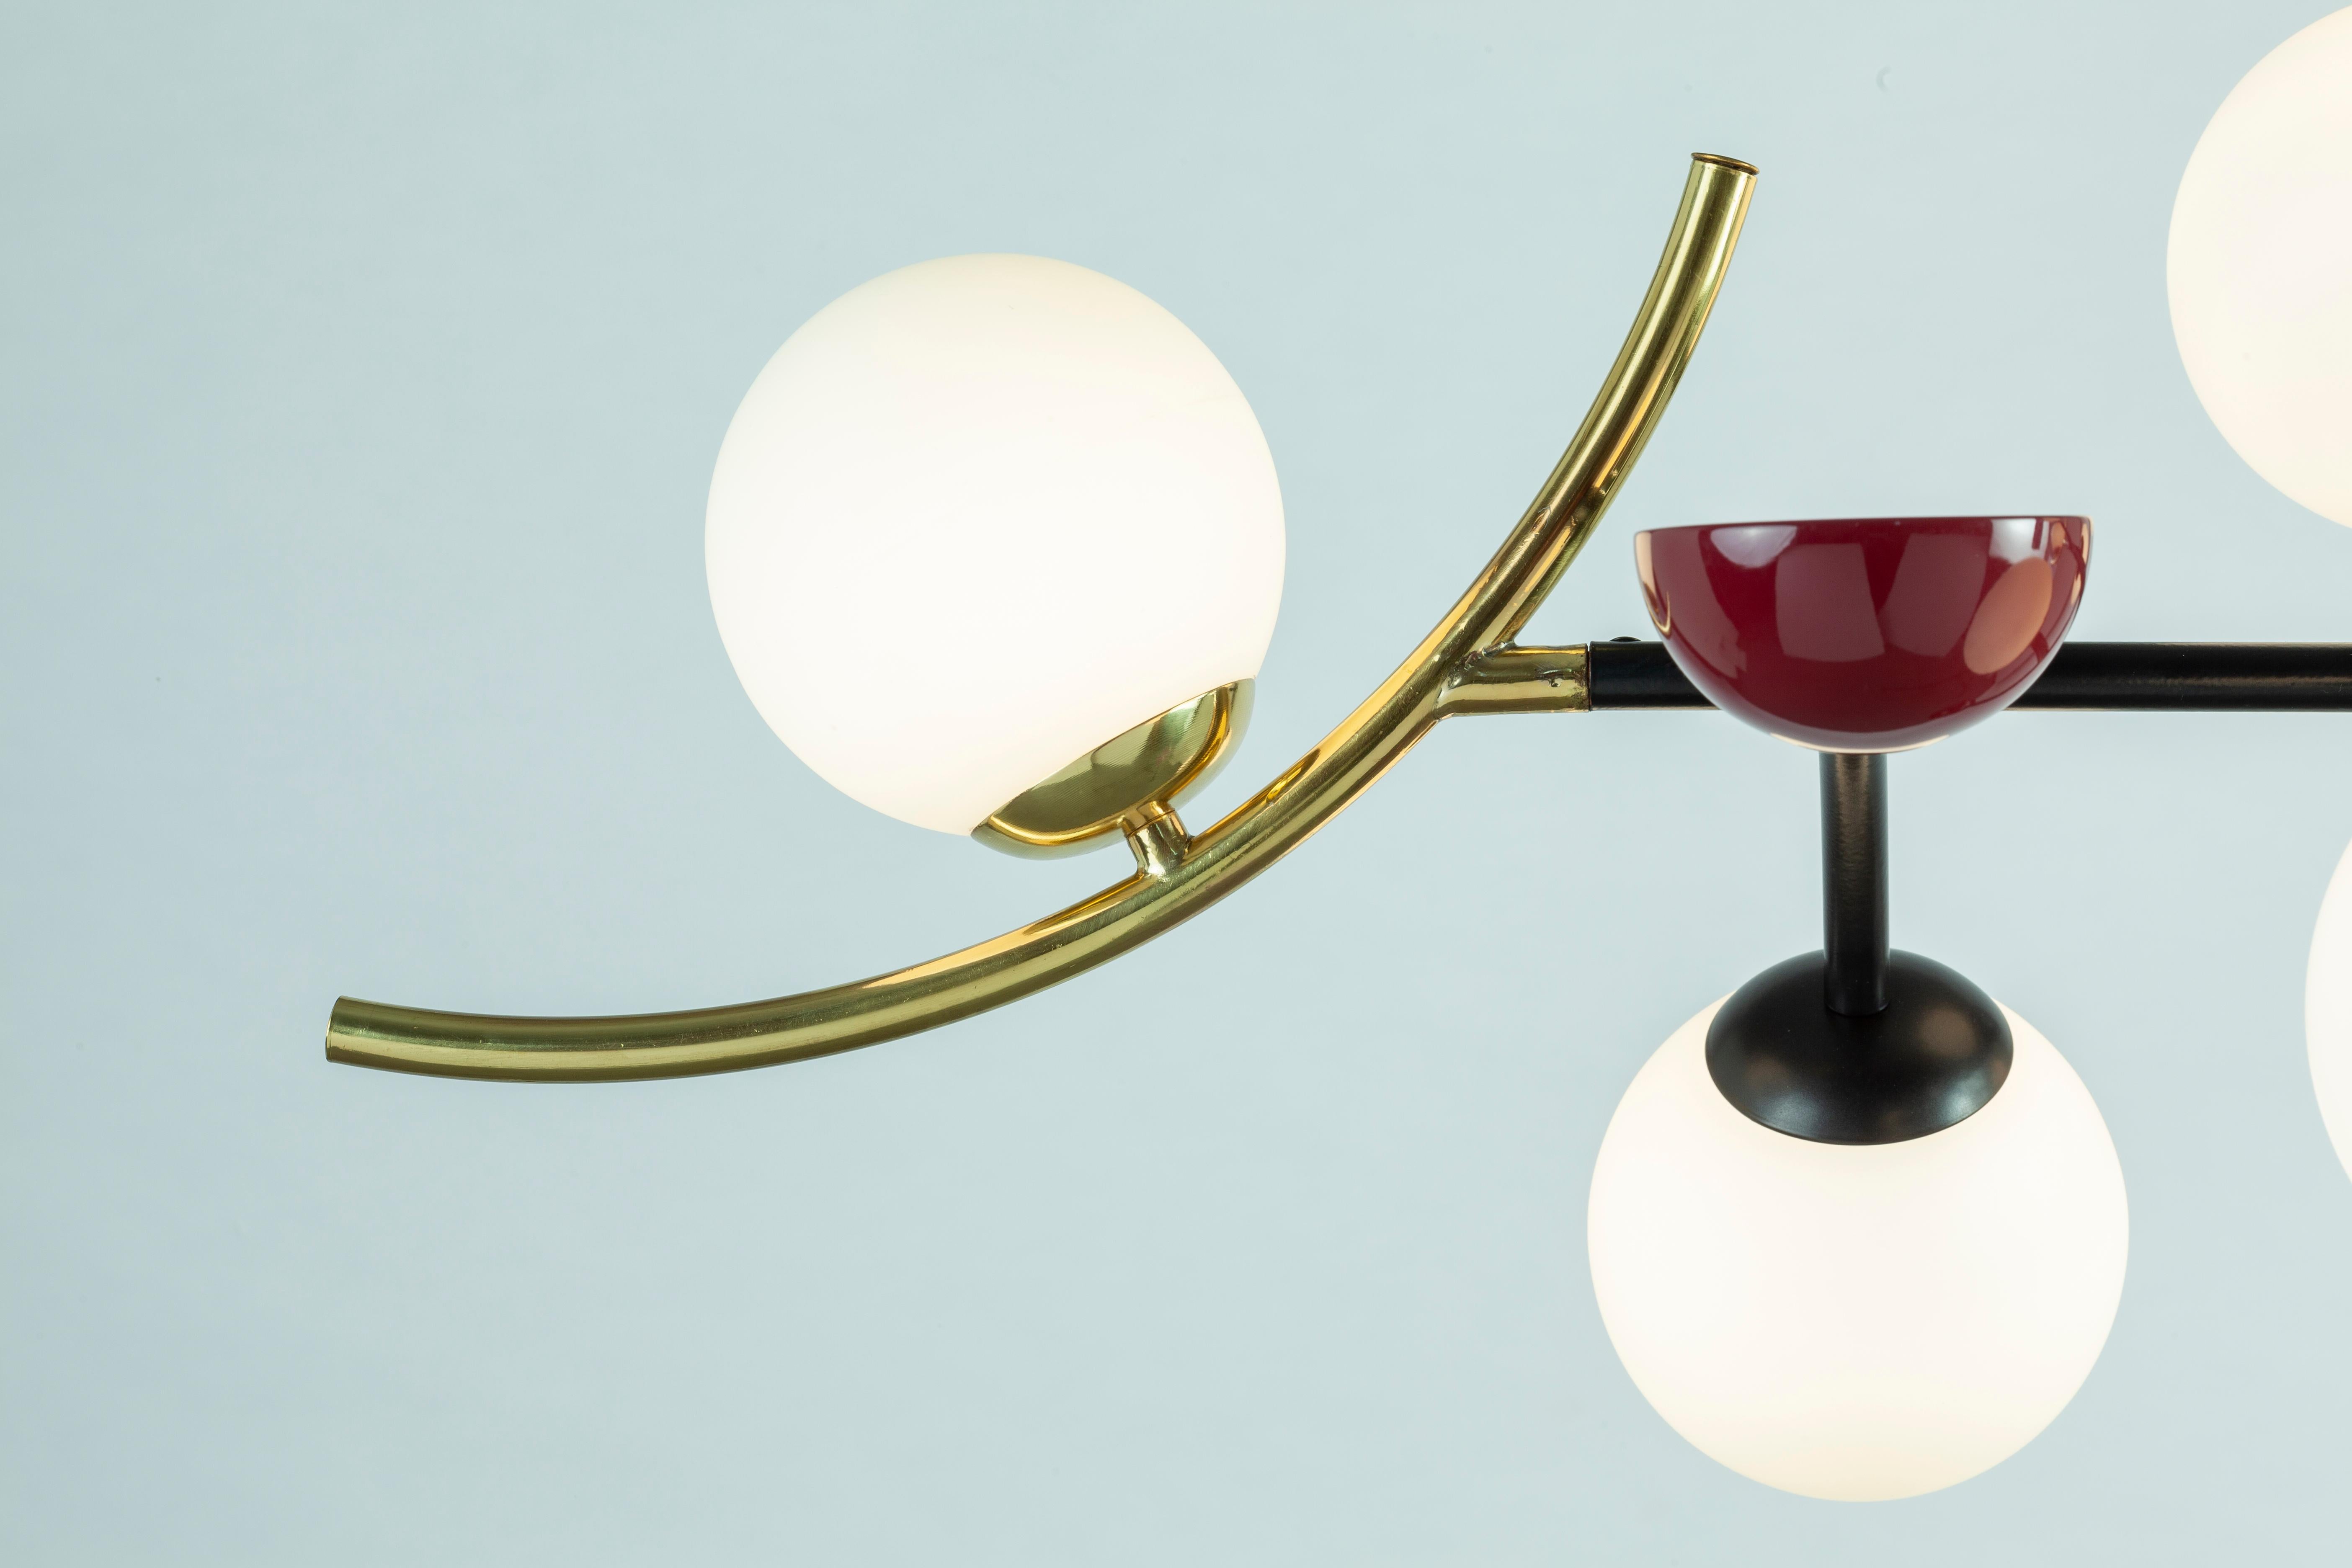 Part ambient light, part artwork, Helio I pendant lamp will highlight any space in all the right ways thanks to its Frosted Glass globes and sleek Polished Brass details. Made to order and color customizable.

A collection that is raw and expressive